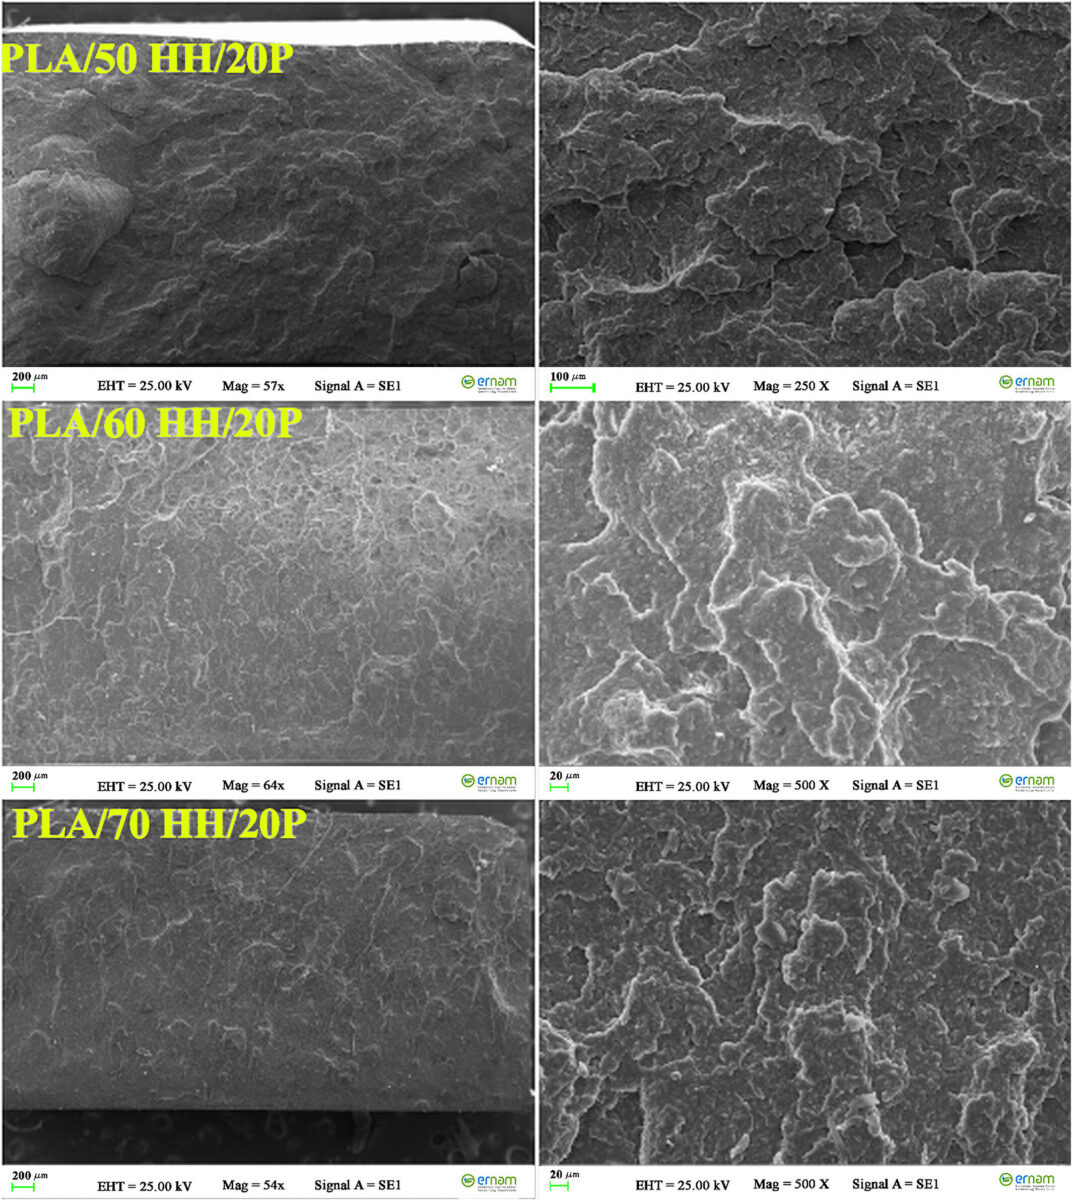 Impact fracture surfaces of the composites containing different amounts of HH under constant loading of plasticizer (20 wt%)